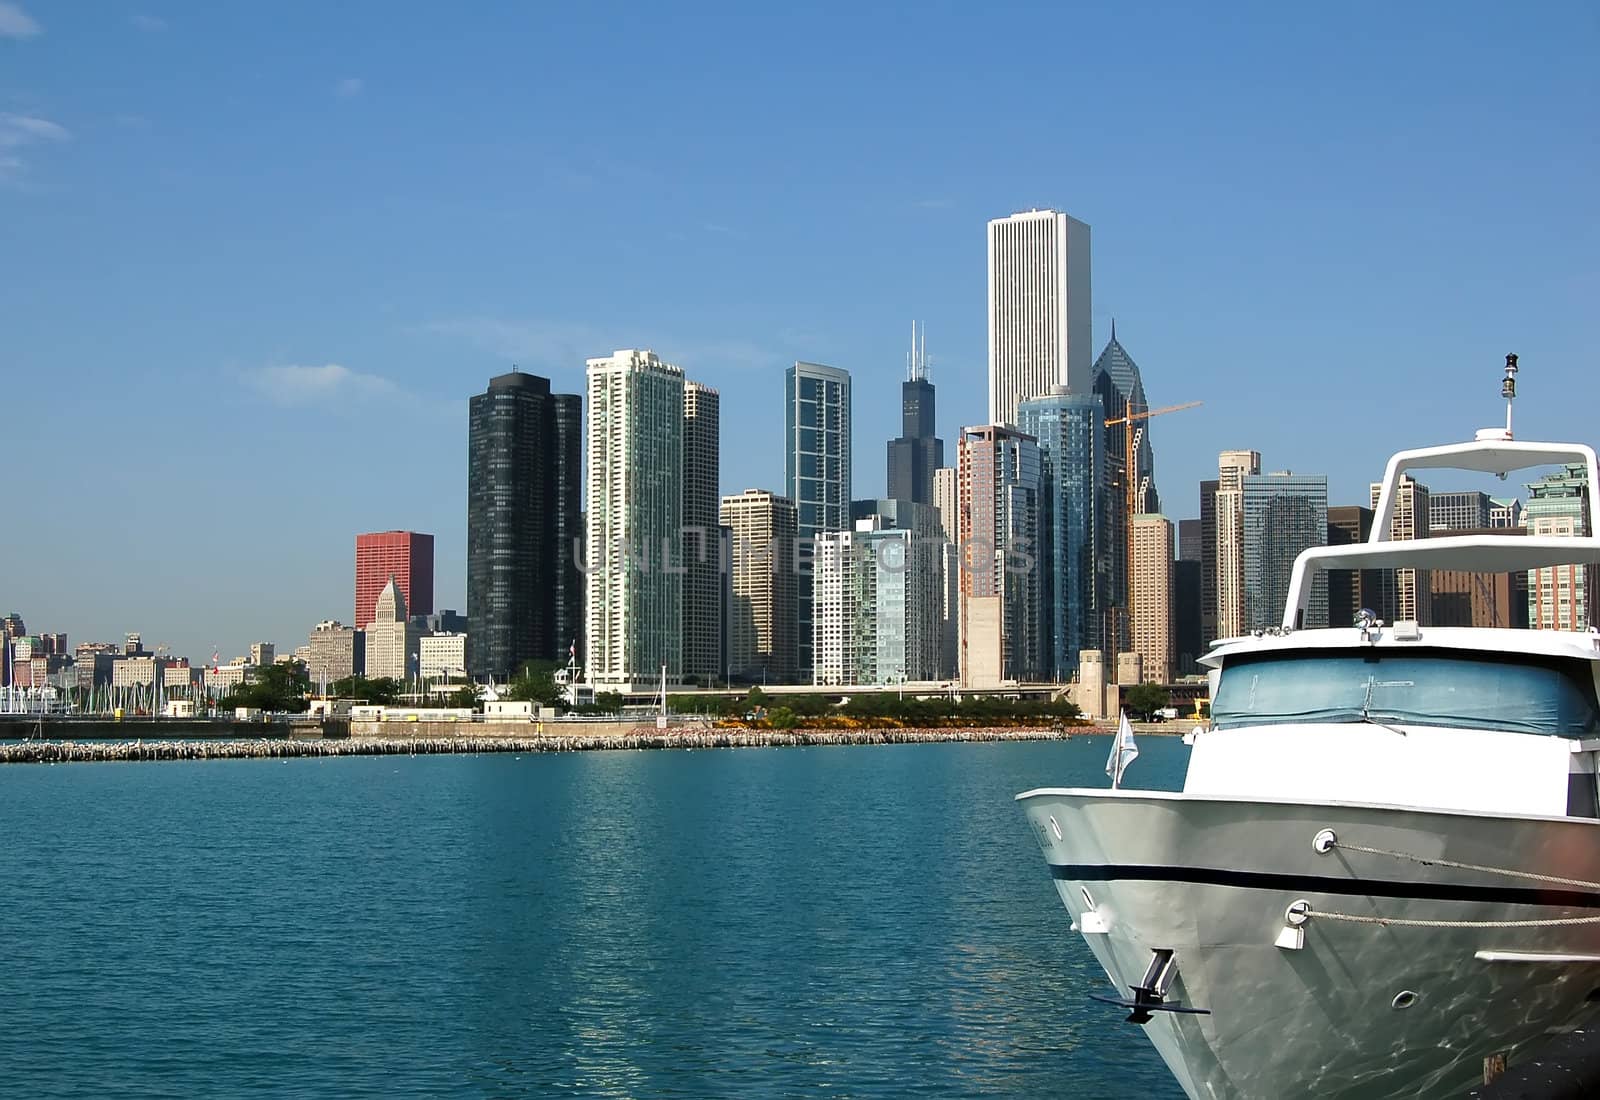 A view of the Chicago skyline as seen from the Navy Pier